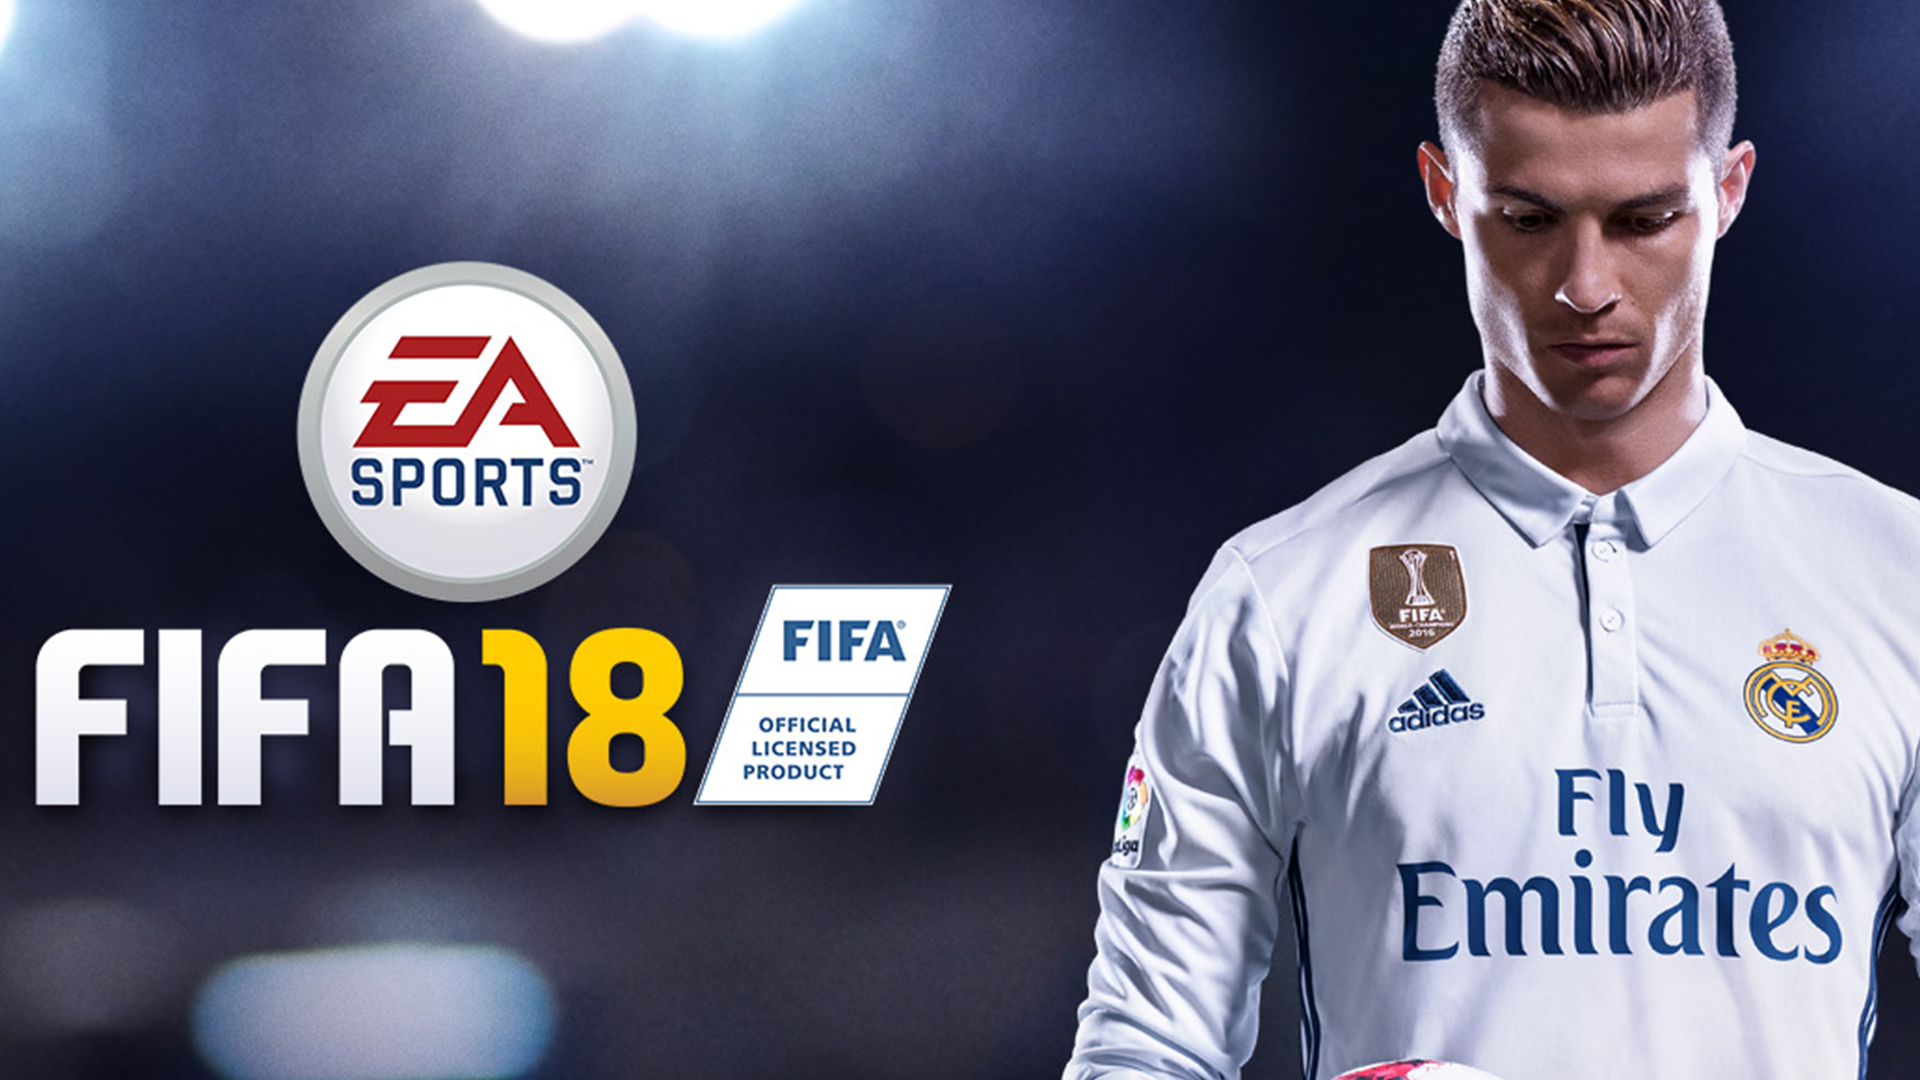 Habemus FIFA 18 Demo Available Now! (PC, Playstation 4 and XBox One), by  Uebmaster